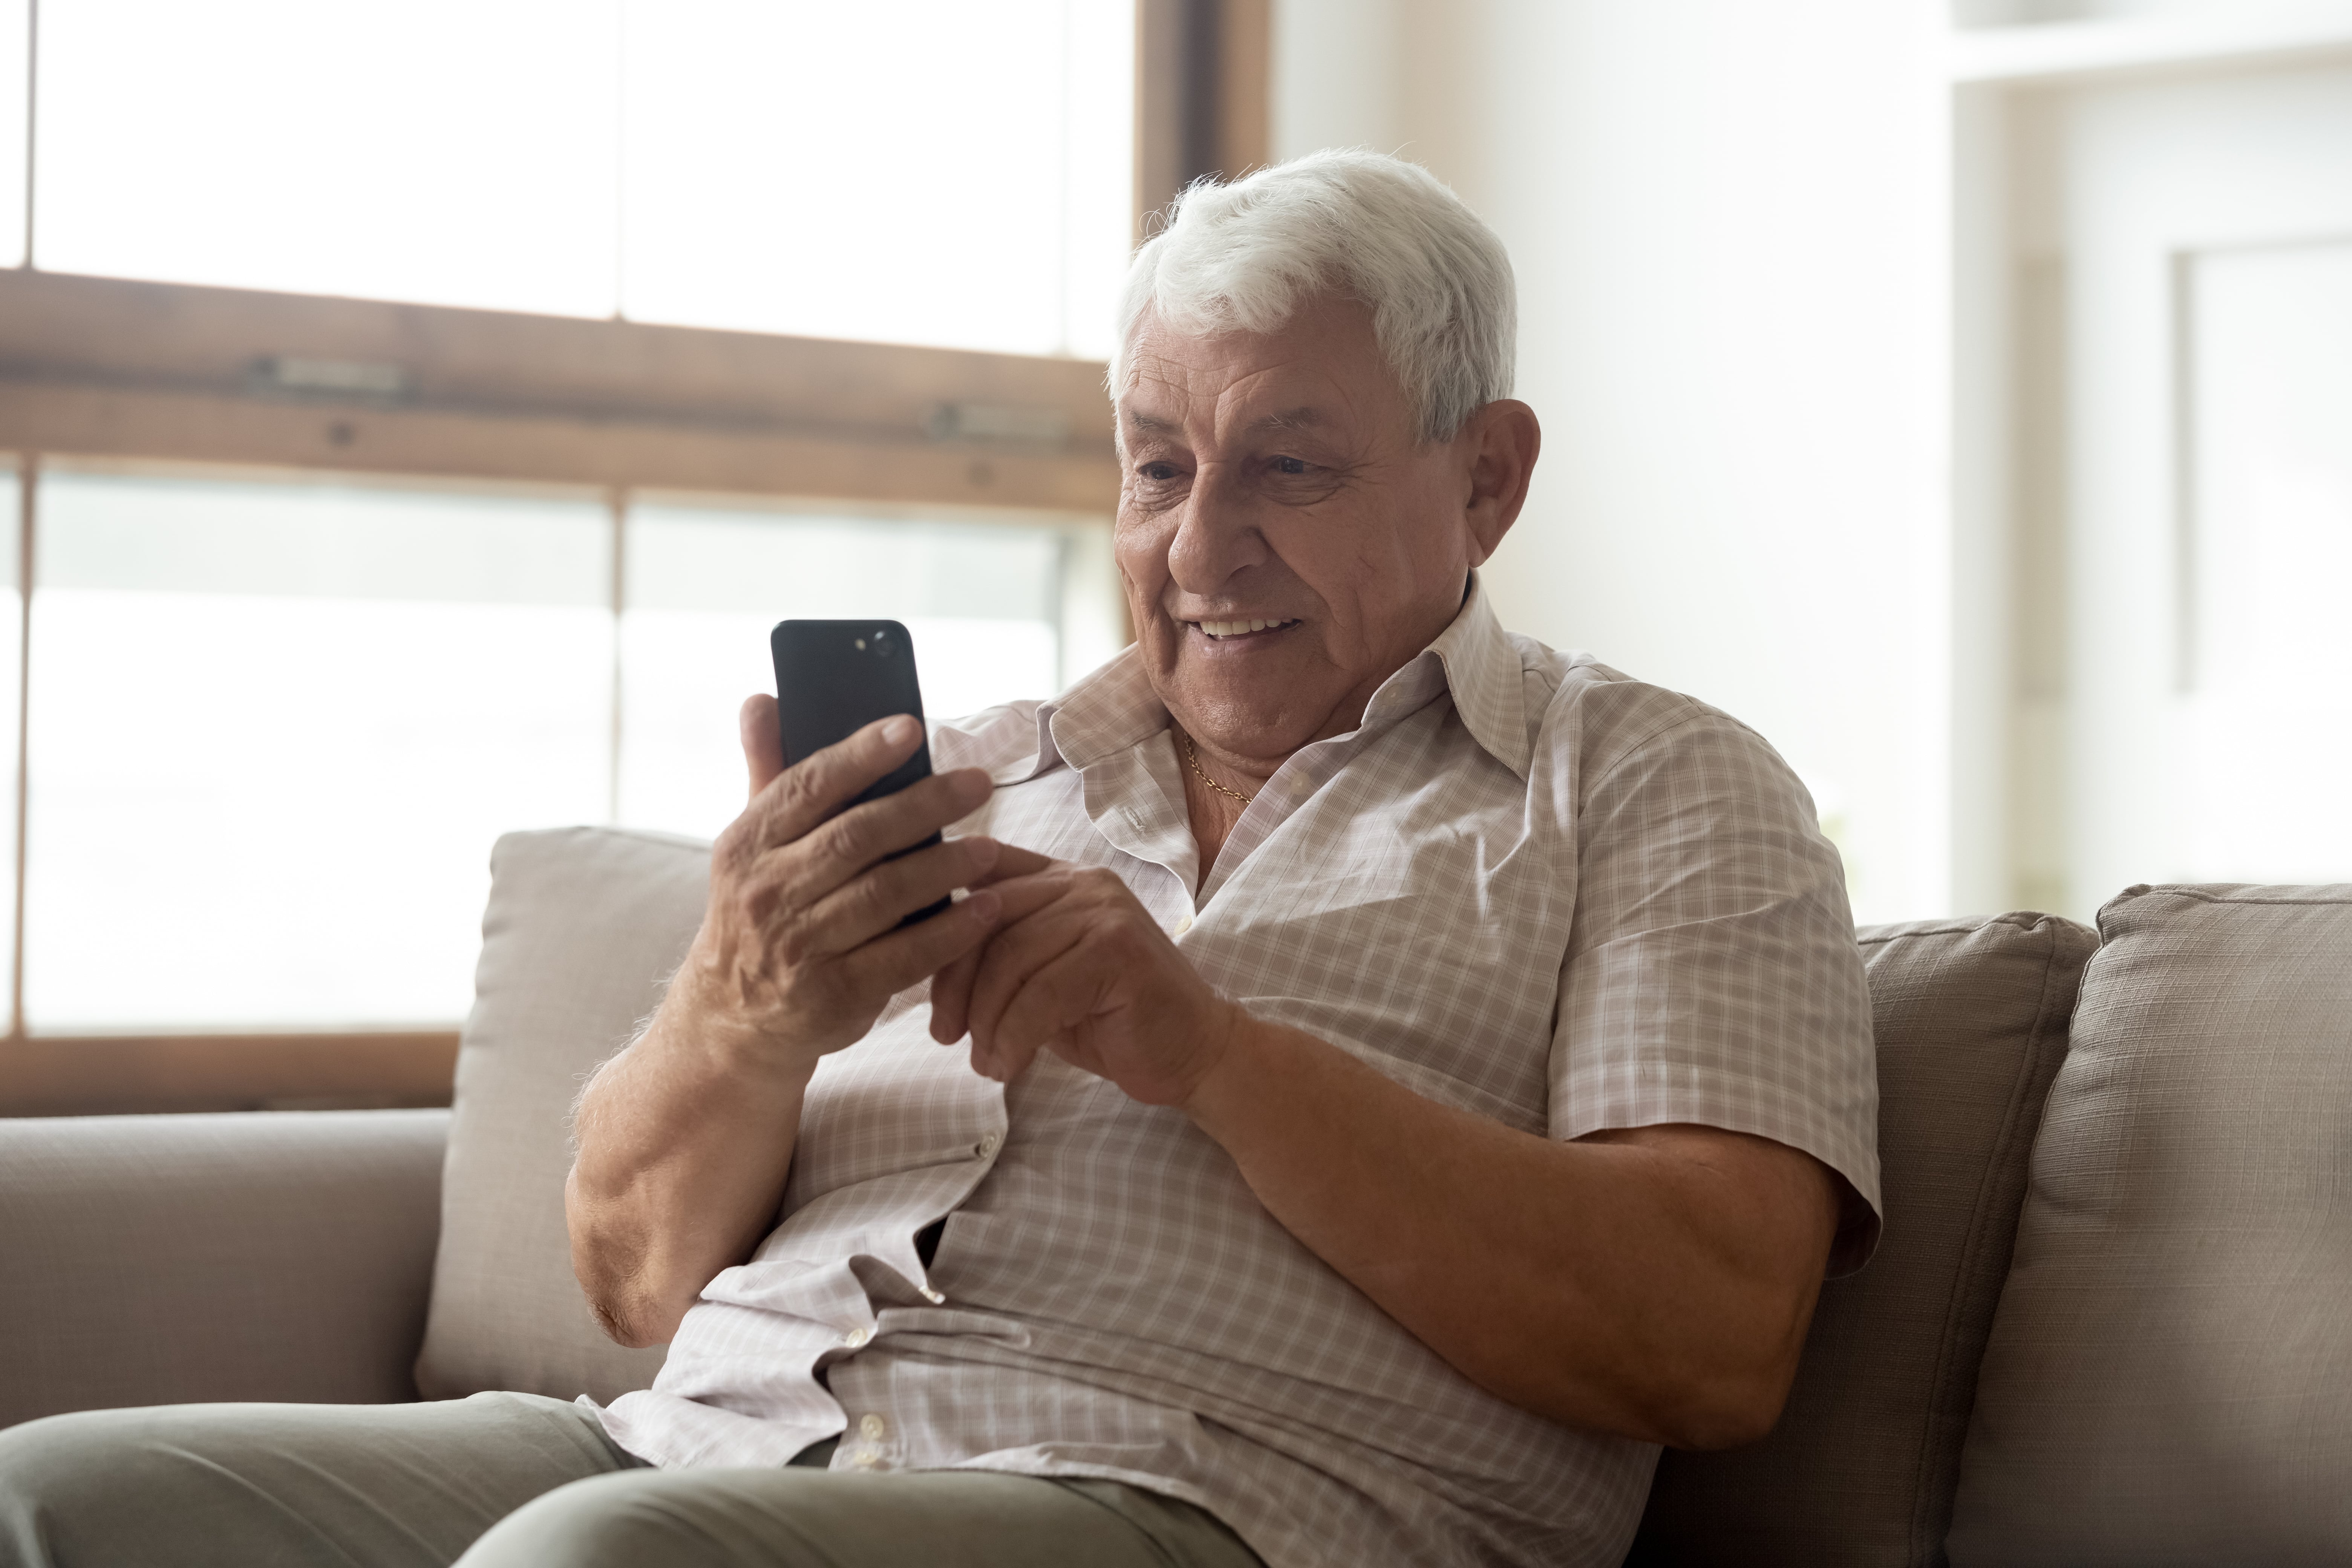 An older adult using cell phone technology